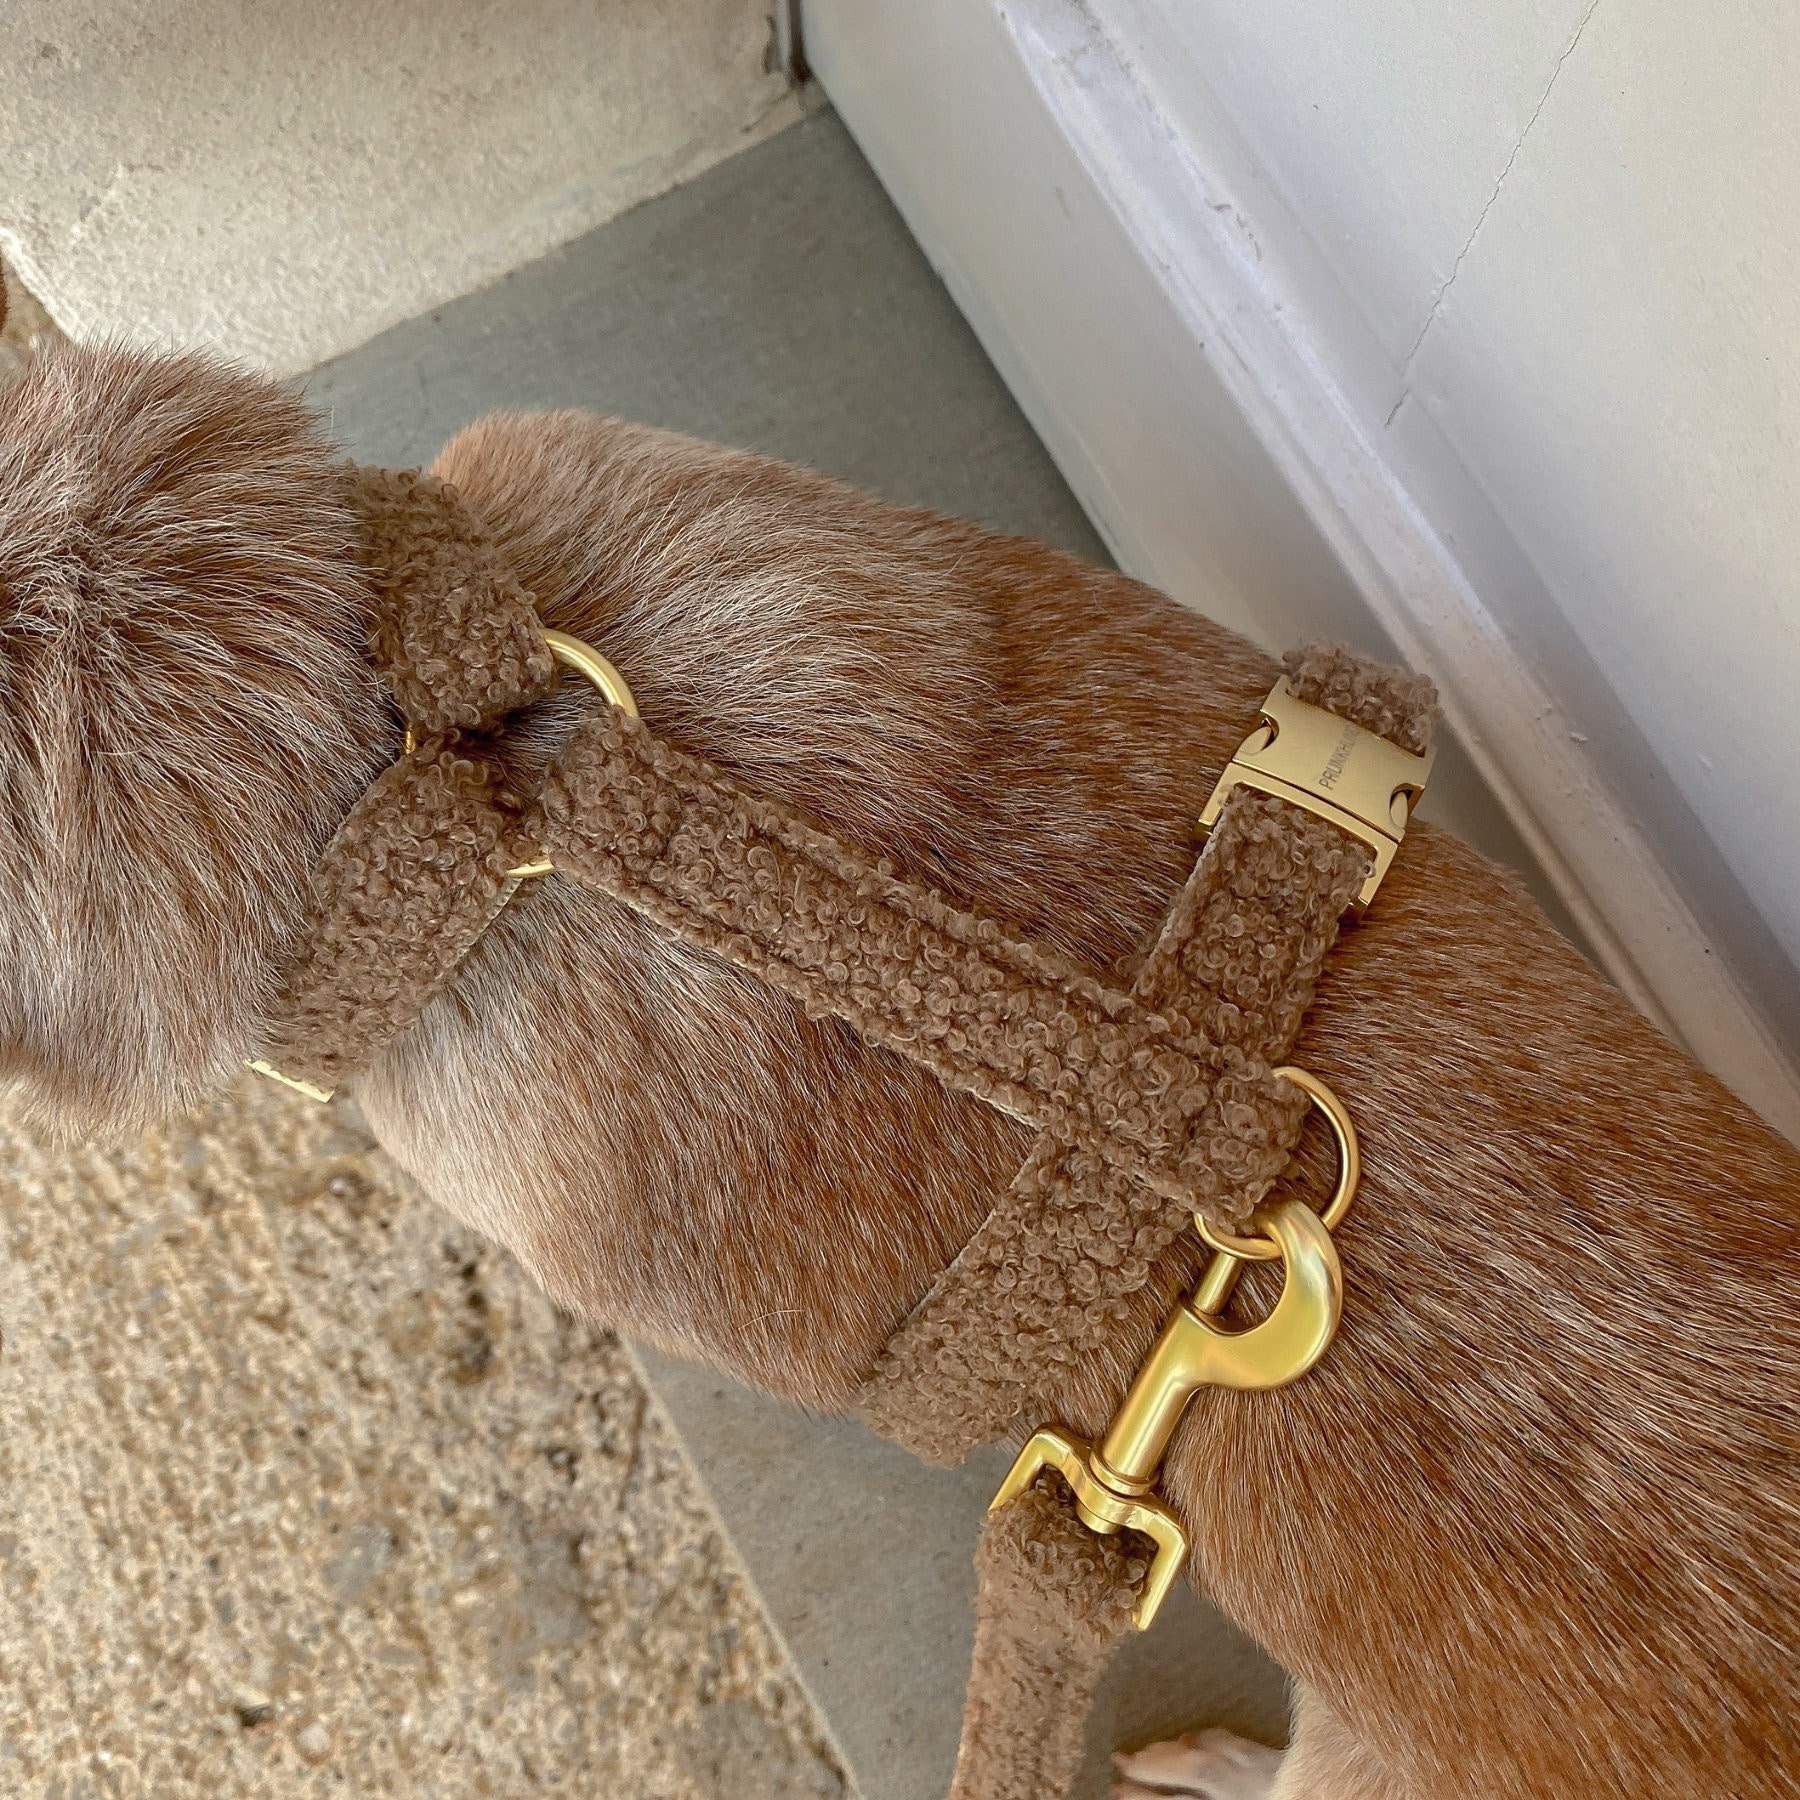 Beige Harness - Leather harness for your dog